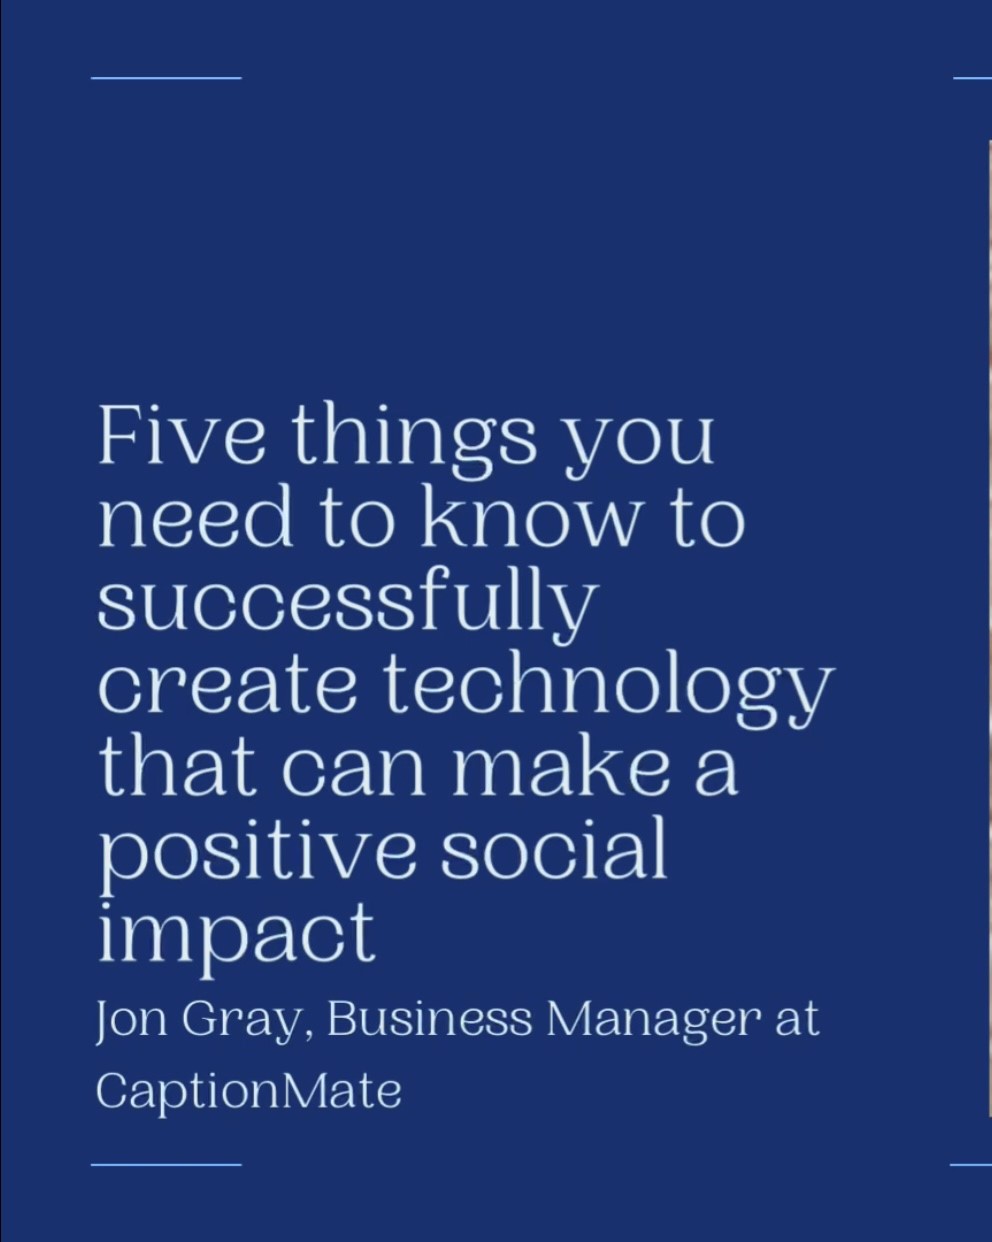 Blue background with "Five things you need to know to successfully create technology that can make a positive social impact" on top of it